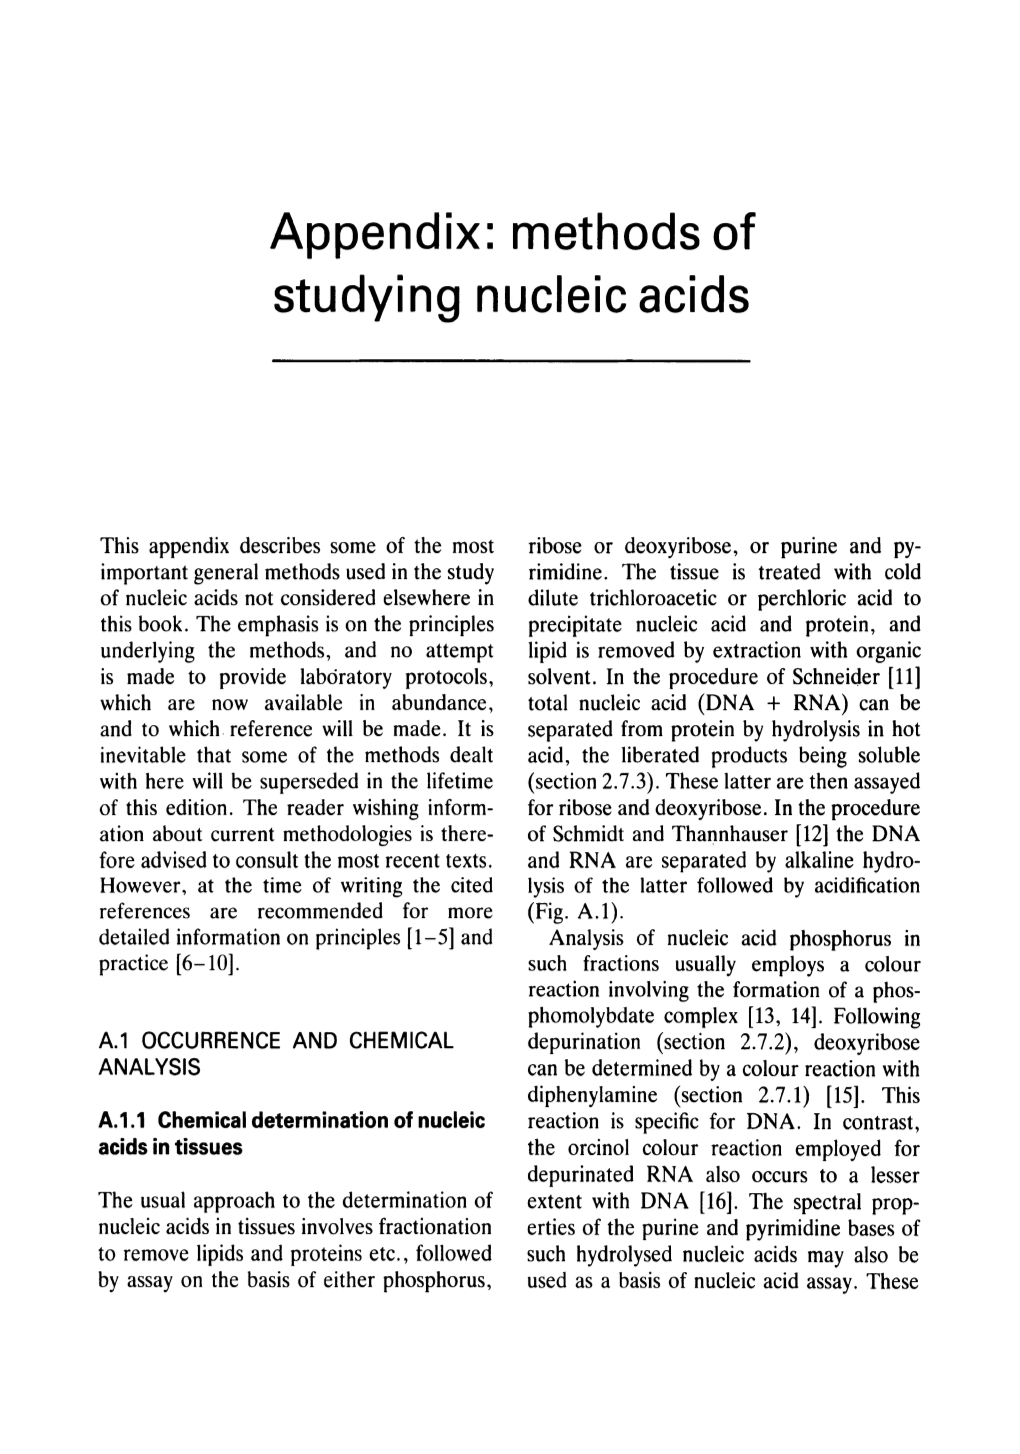 Appendix: Methods of Studying Nucleic Acids